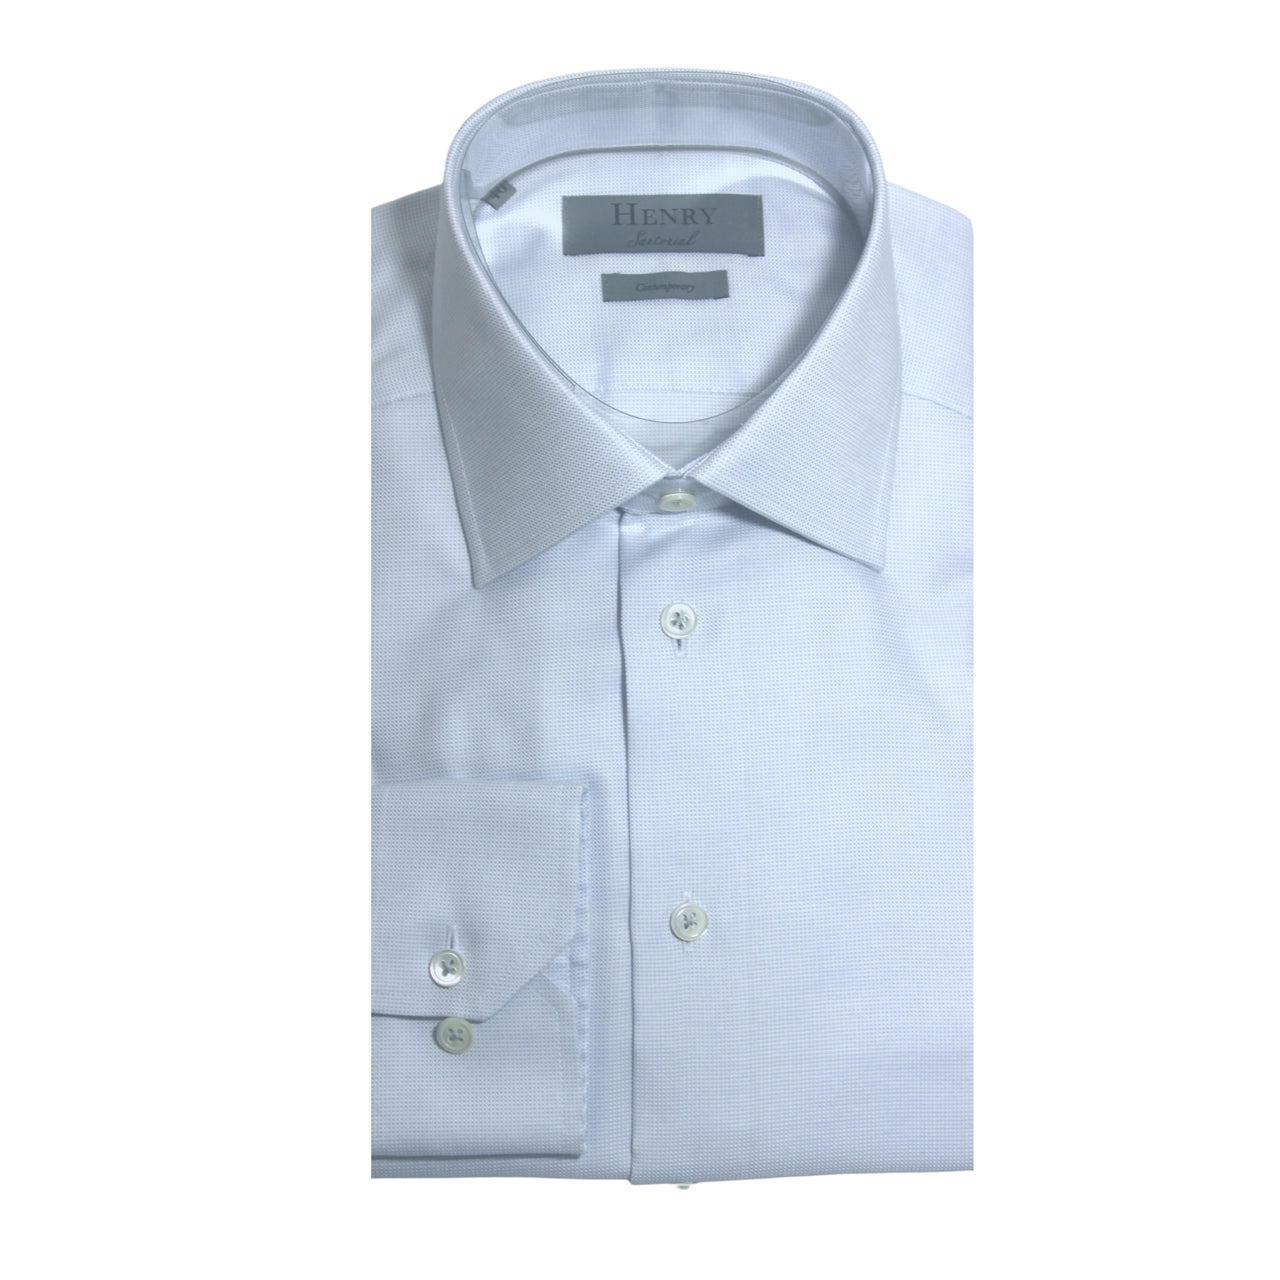 HENRY SARTORIAL Bedford Shirt Single Cuff Contemporary Fit Silver